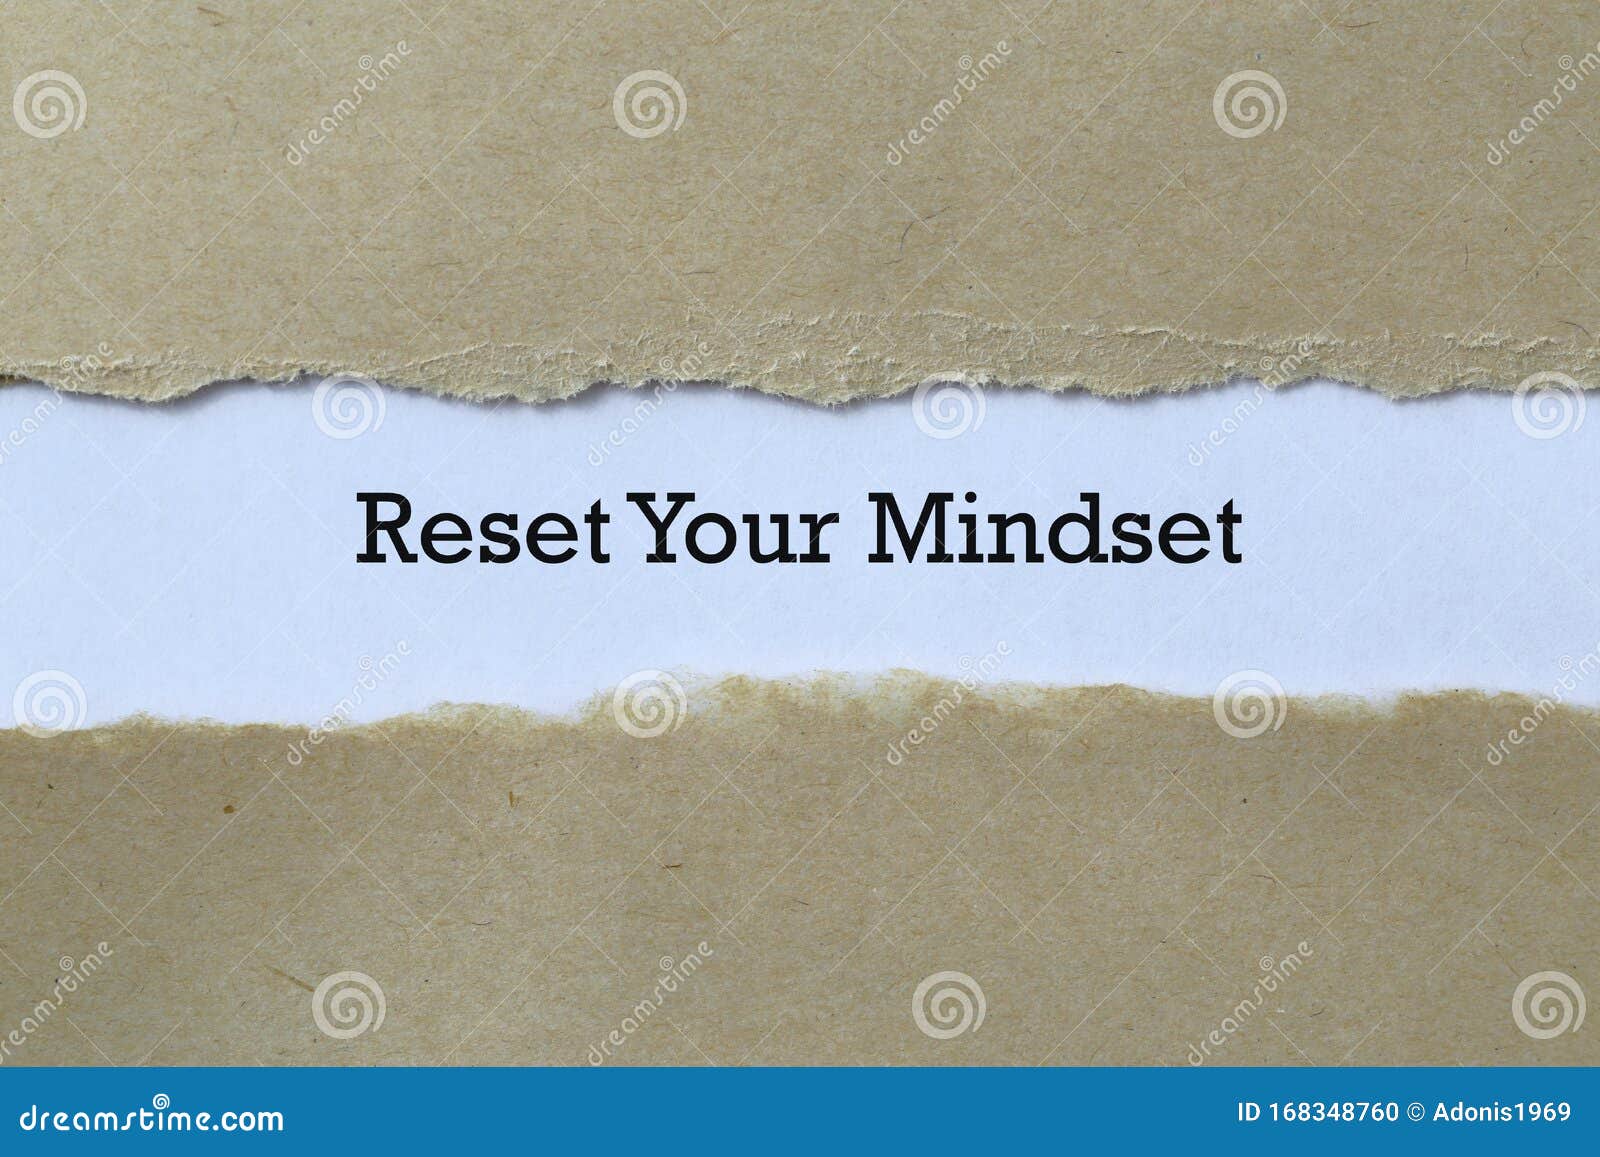 reset your mindset on paper